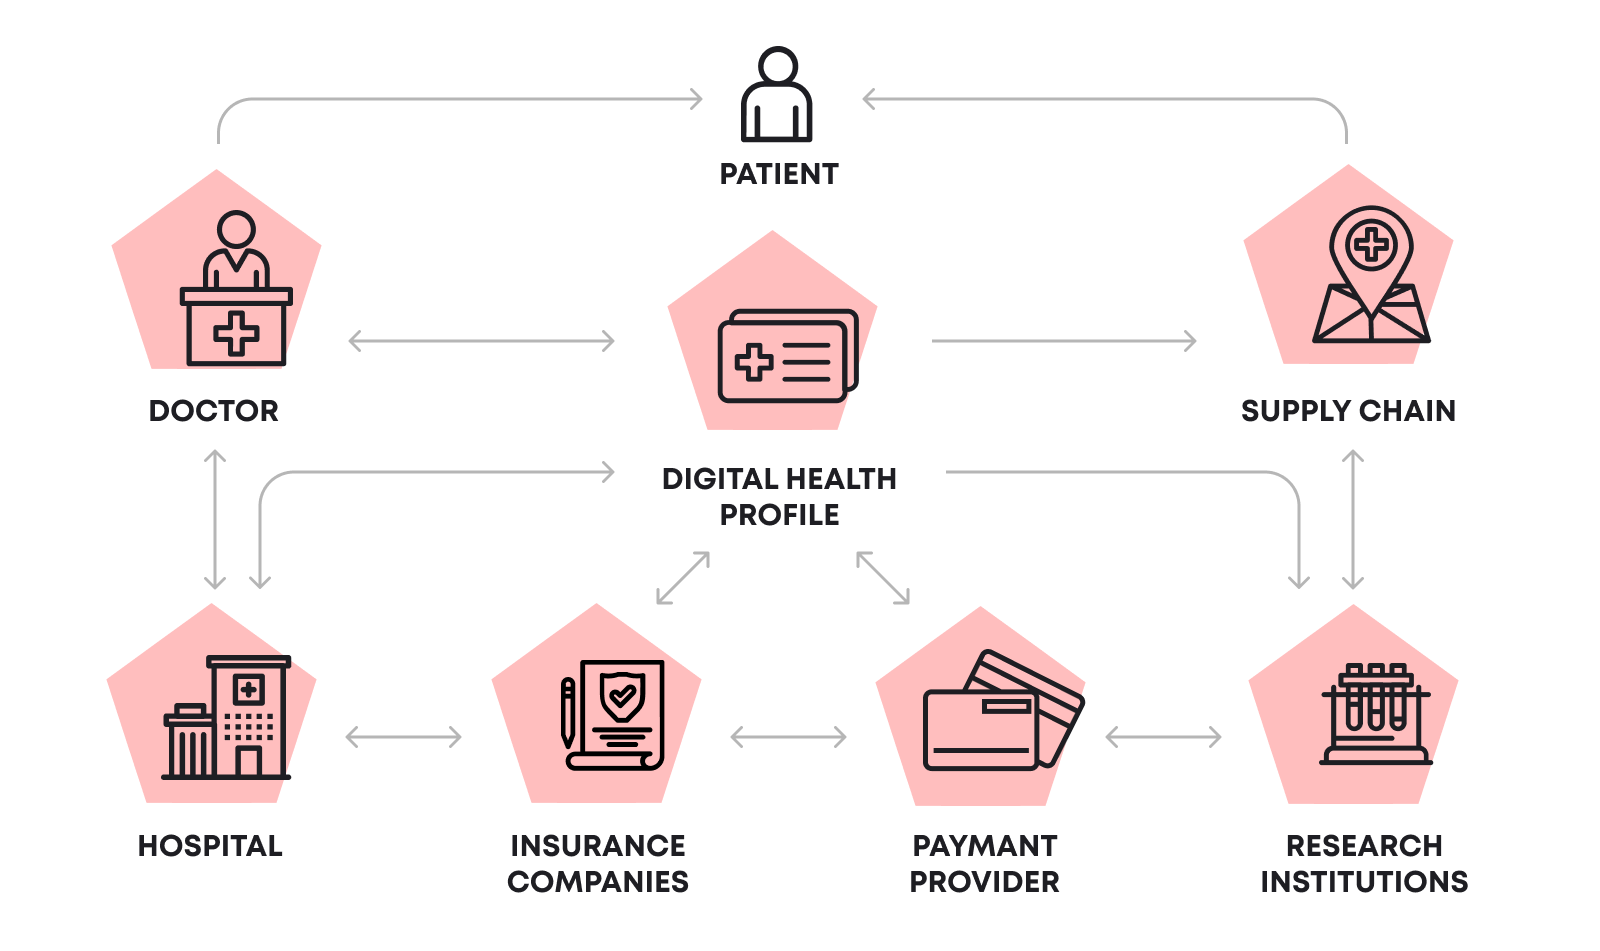 The integration of blockchain technology in healthcare is about revolutionizing patient care, securing sensitive data, and enhancing operational efficiencies